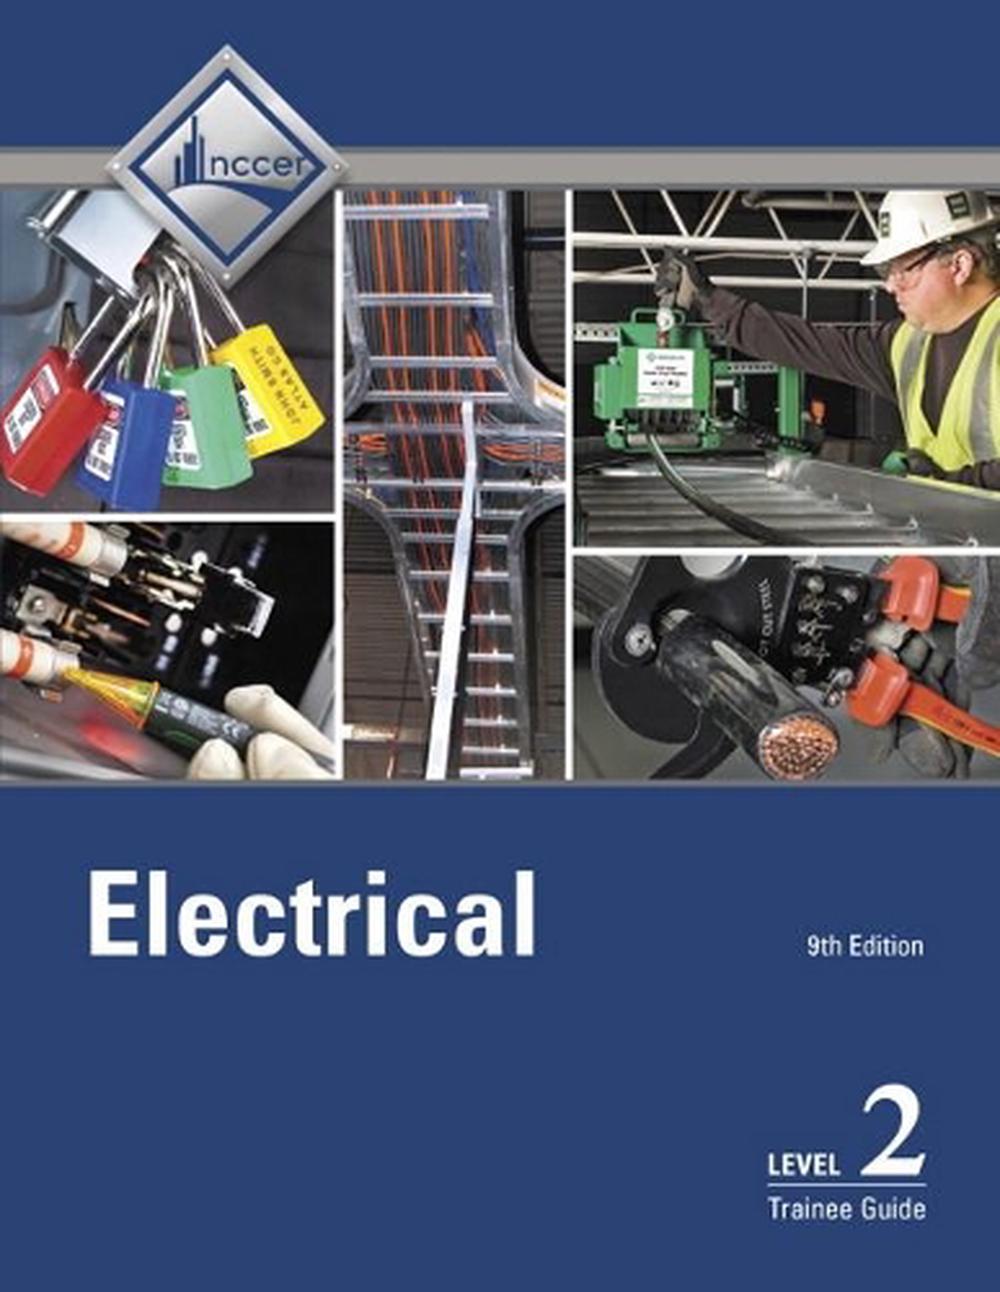 Electrical Level 2 Trainee Guide (hardback) by Nccer Paperback Book